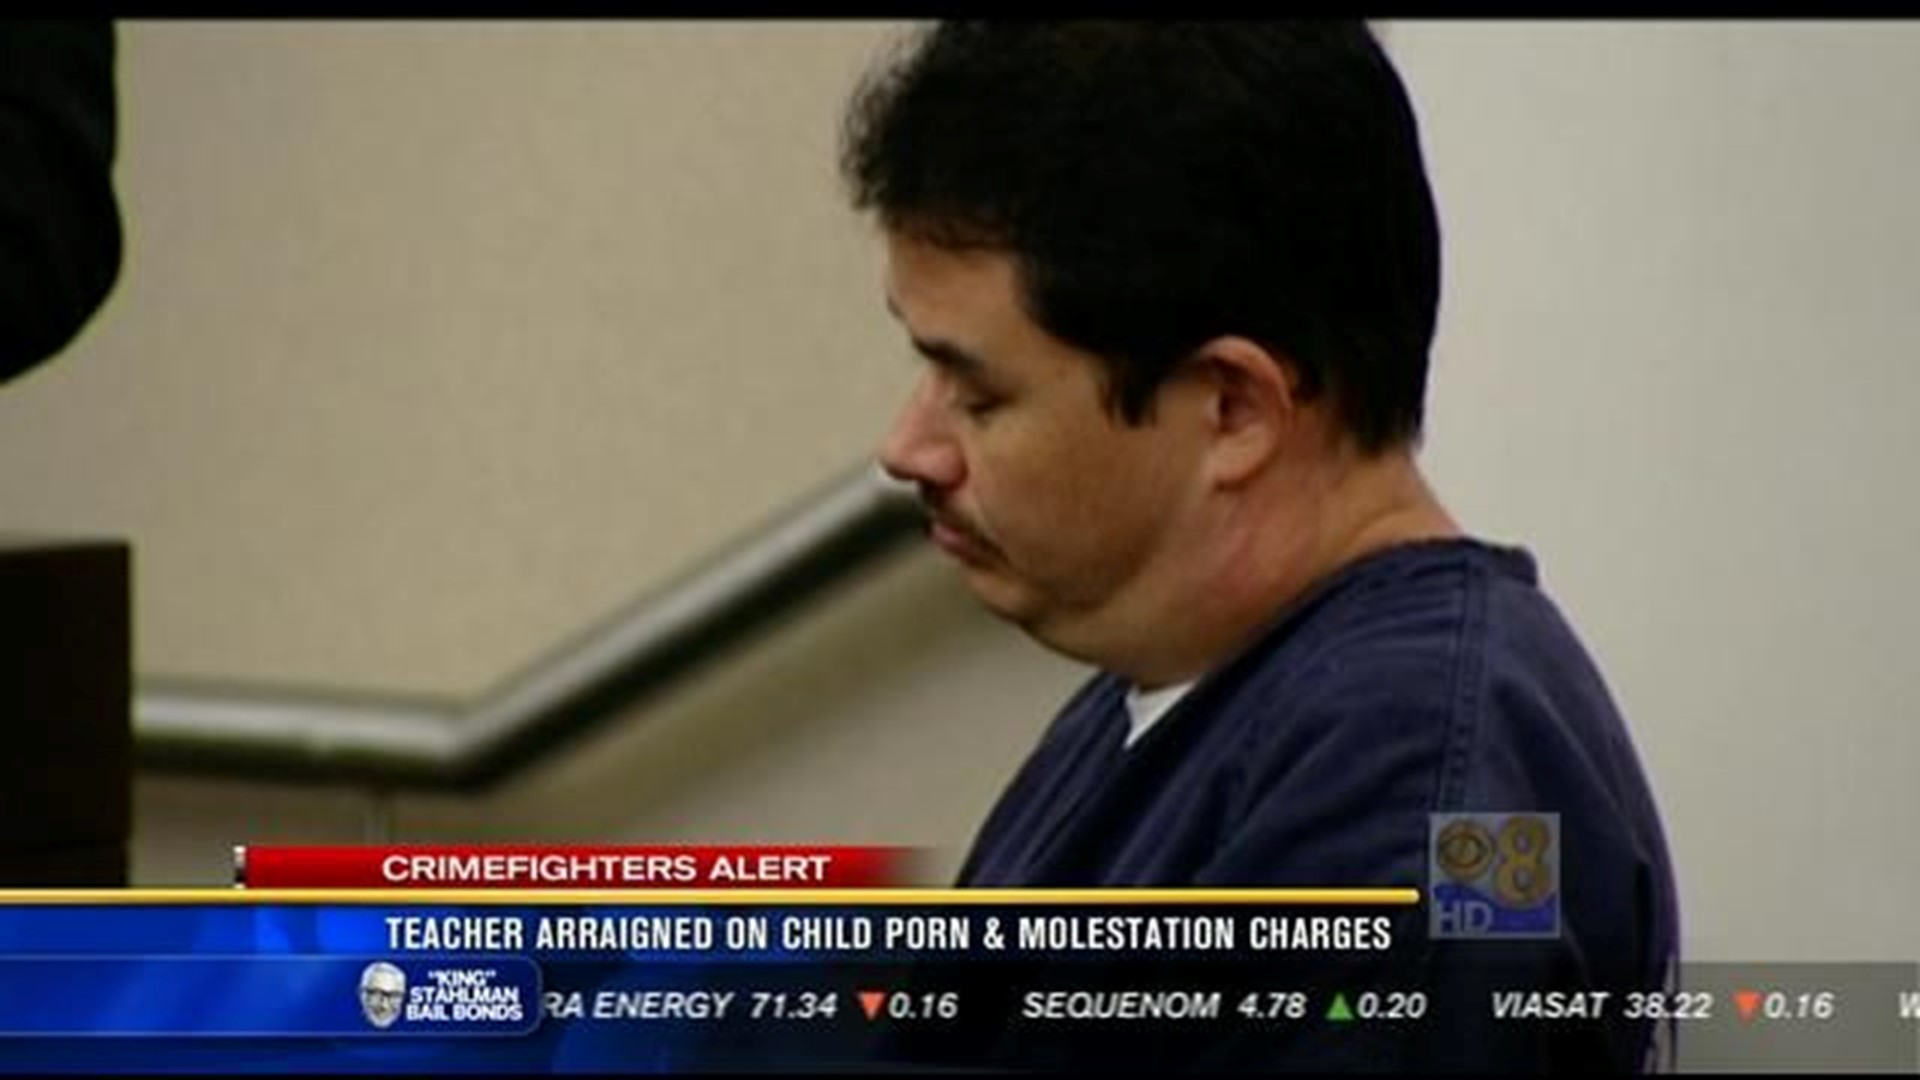 Teachers And Students Sex Videos Free Download - Not guilty plea from South Bay teacher accused of molesting student,  possessing child porn | cbs8.com